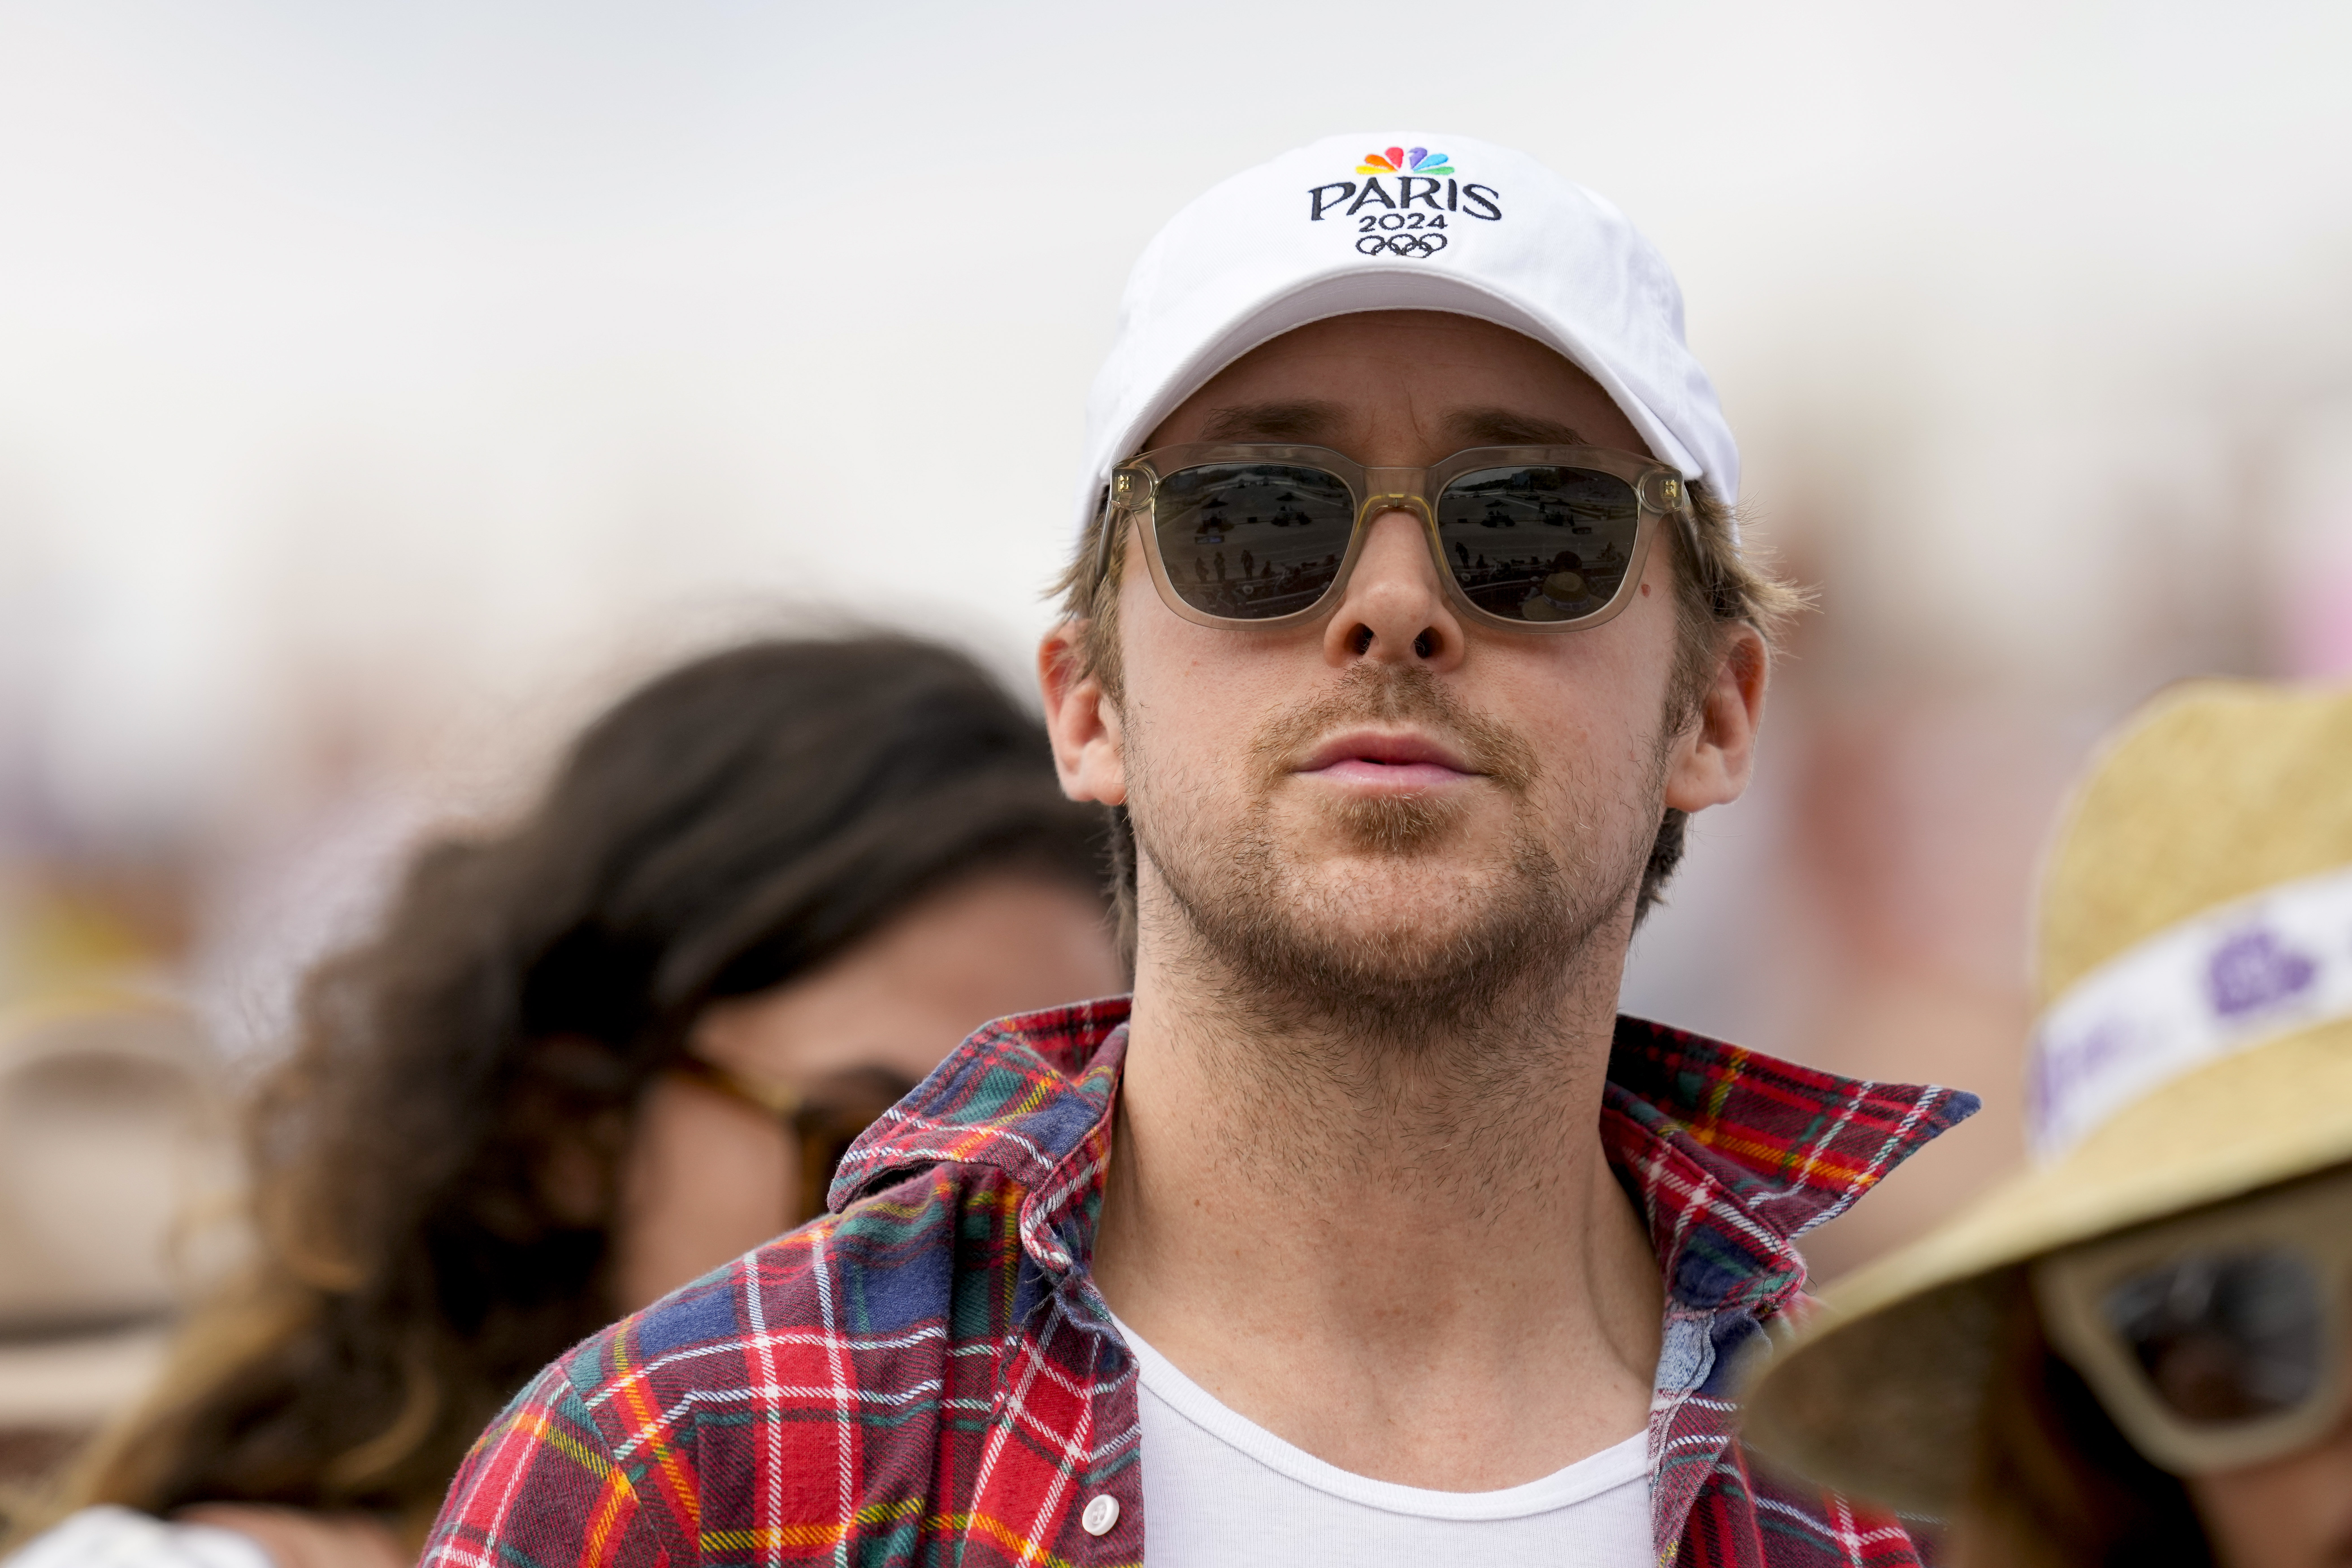 Ryan Gosling sported a white Paris Olympics hat during the Equestrian event